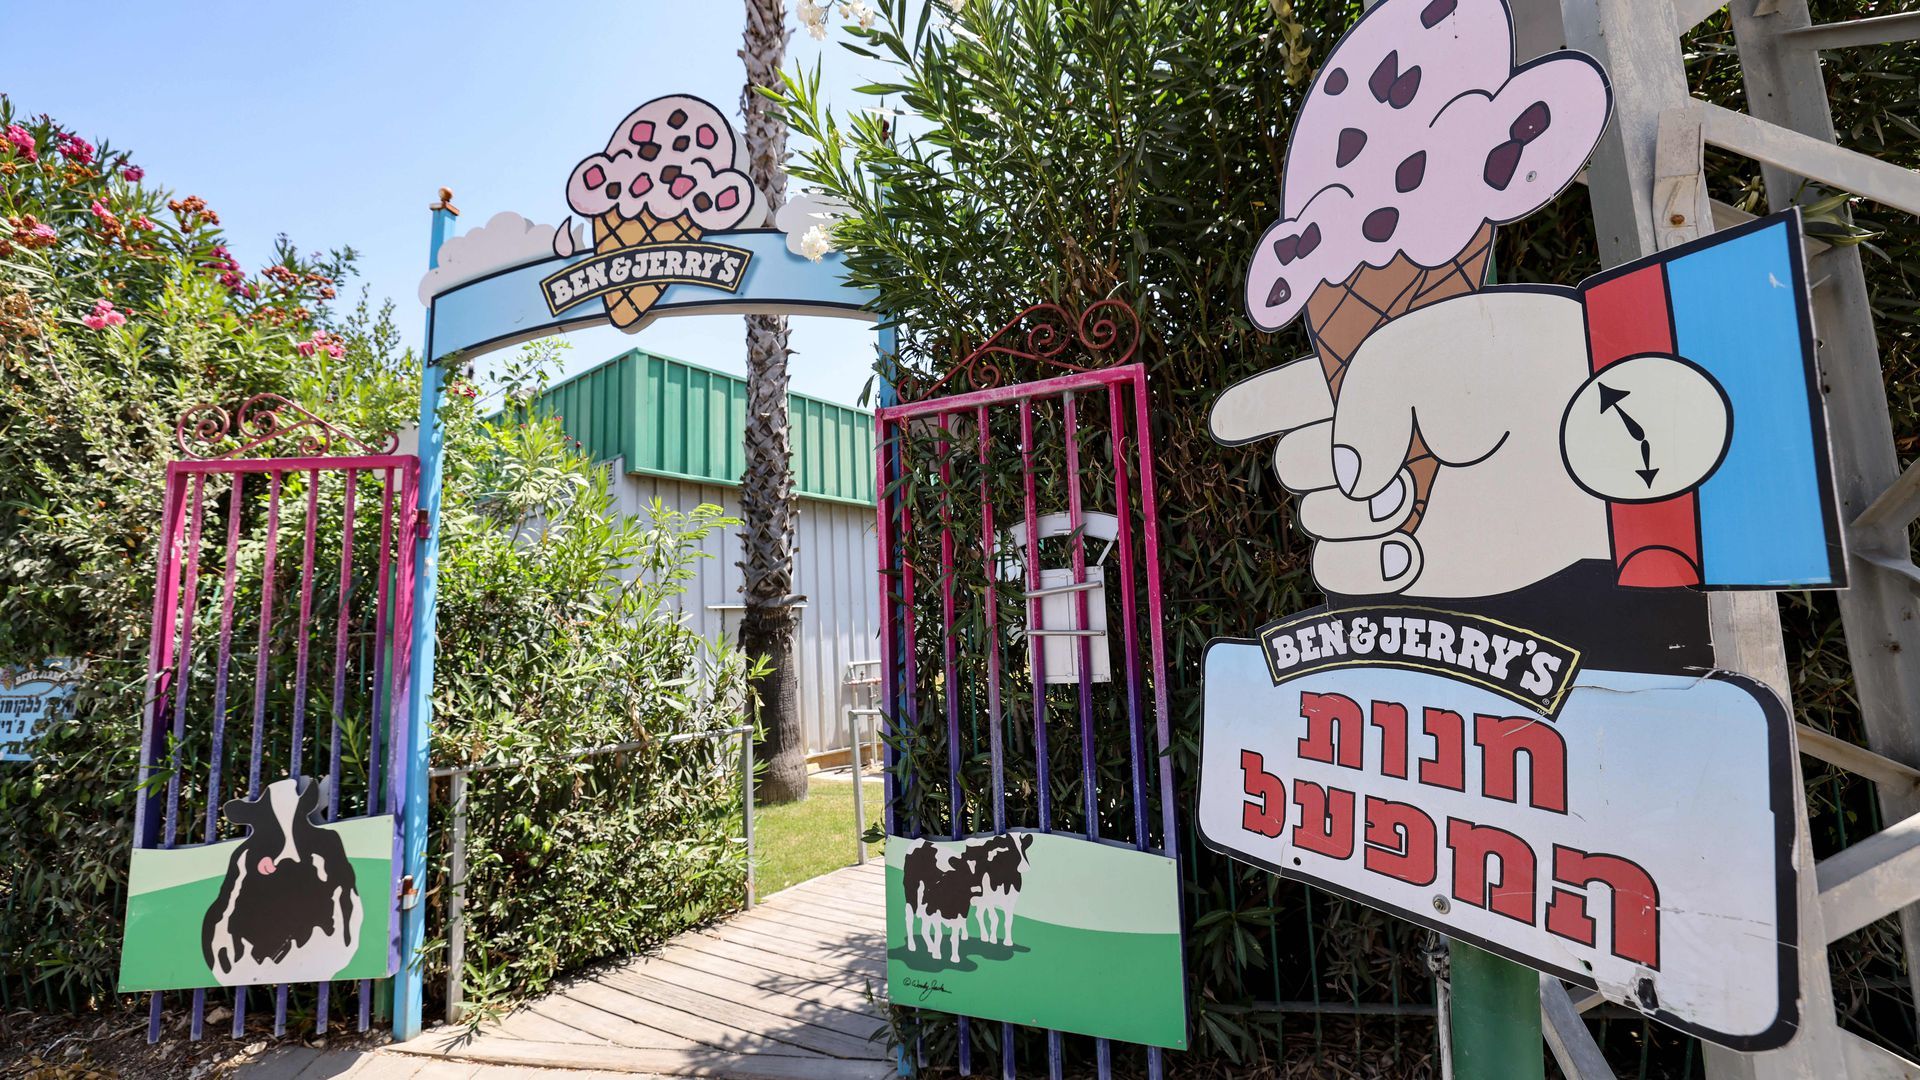 A view of the entrance of the ice-cream shop inside the Ben & Jerry's factory in Be'er Tuvia in southern Israel in July 2021. Photo: Emmanuel Dundad/AFP via Getty Images